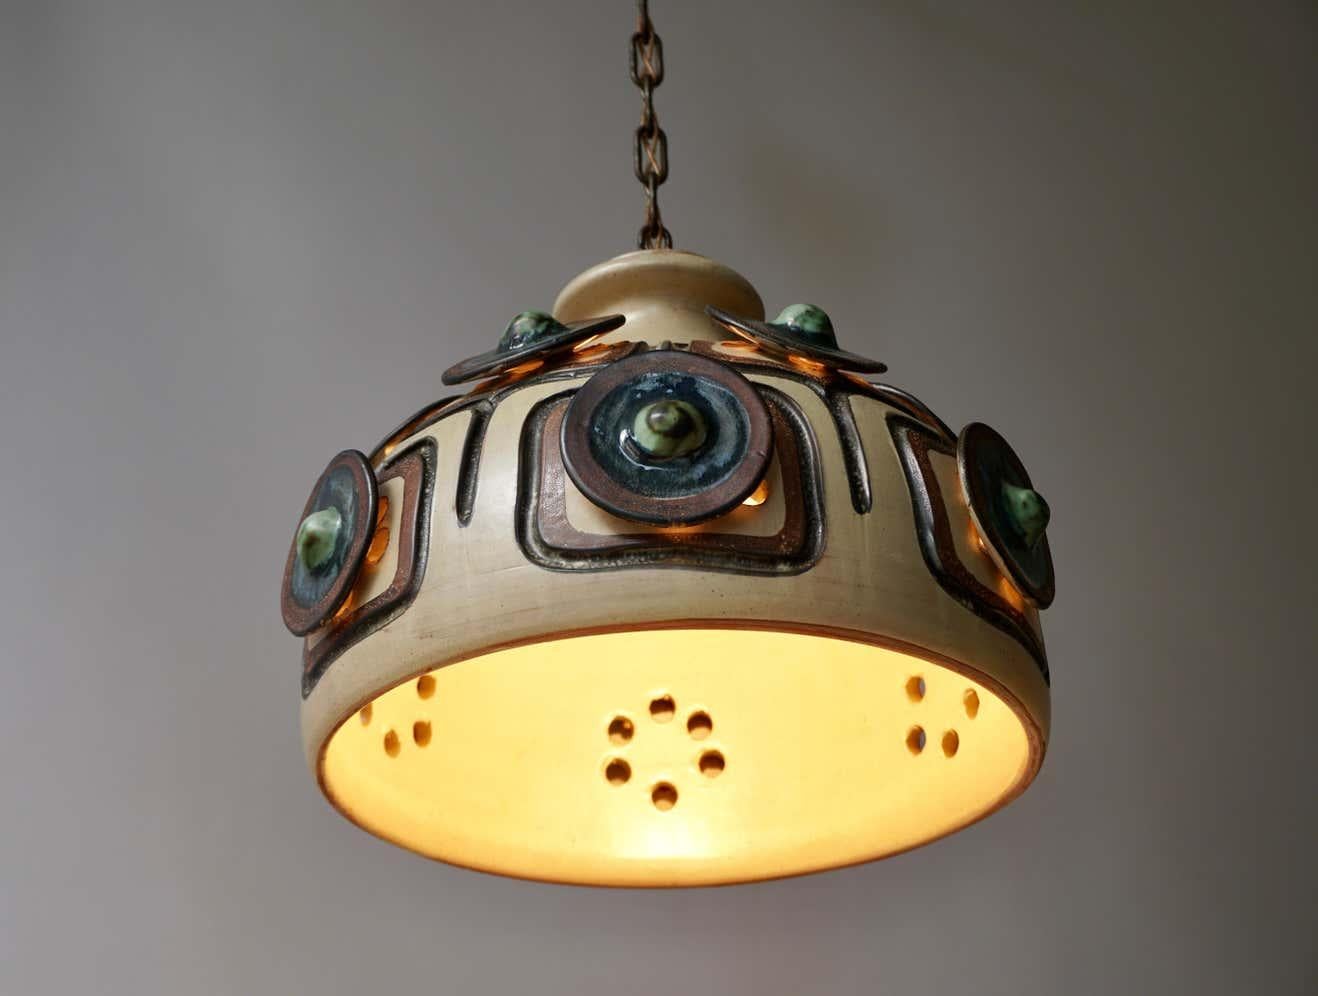 Handmade Danish ceramic chandelier / pendent lamp, made by Jette Hellerøe for Axella in ca. the 1970s. The piece shows a mix of beige, blue, brown and green colors. The Lamp features round decorated discs from where the lights shines through as also